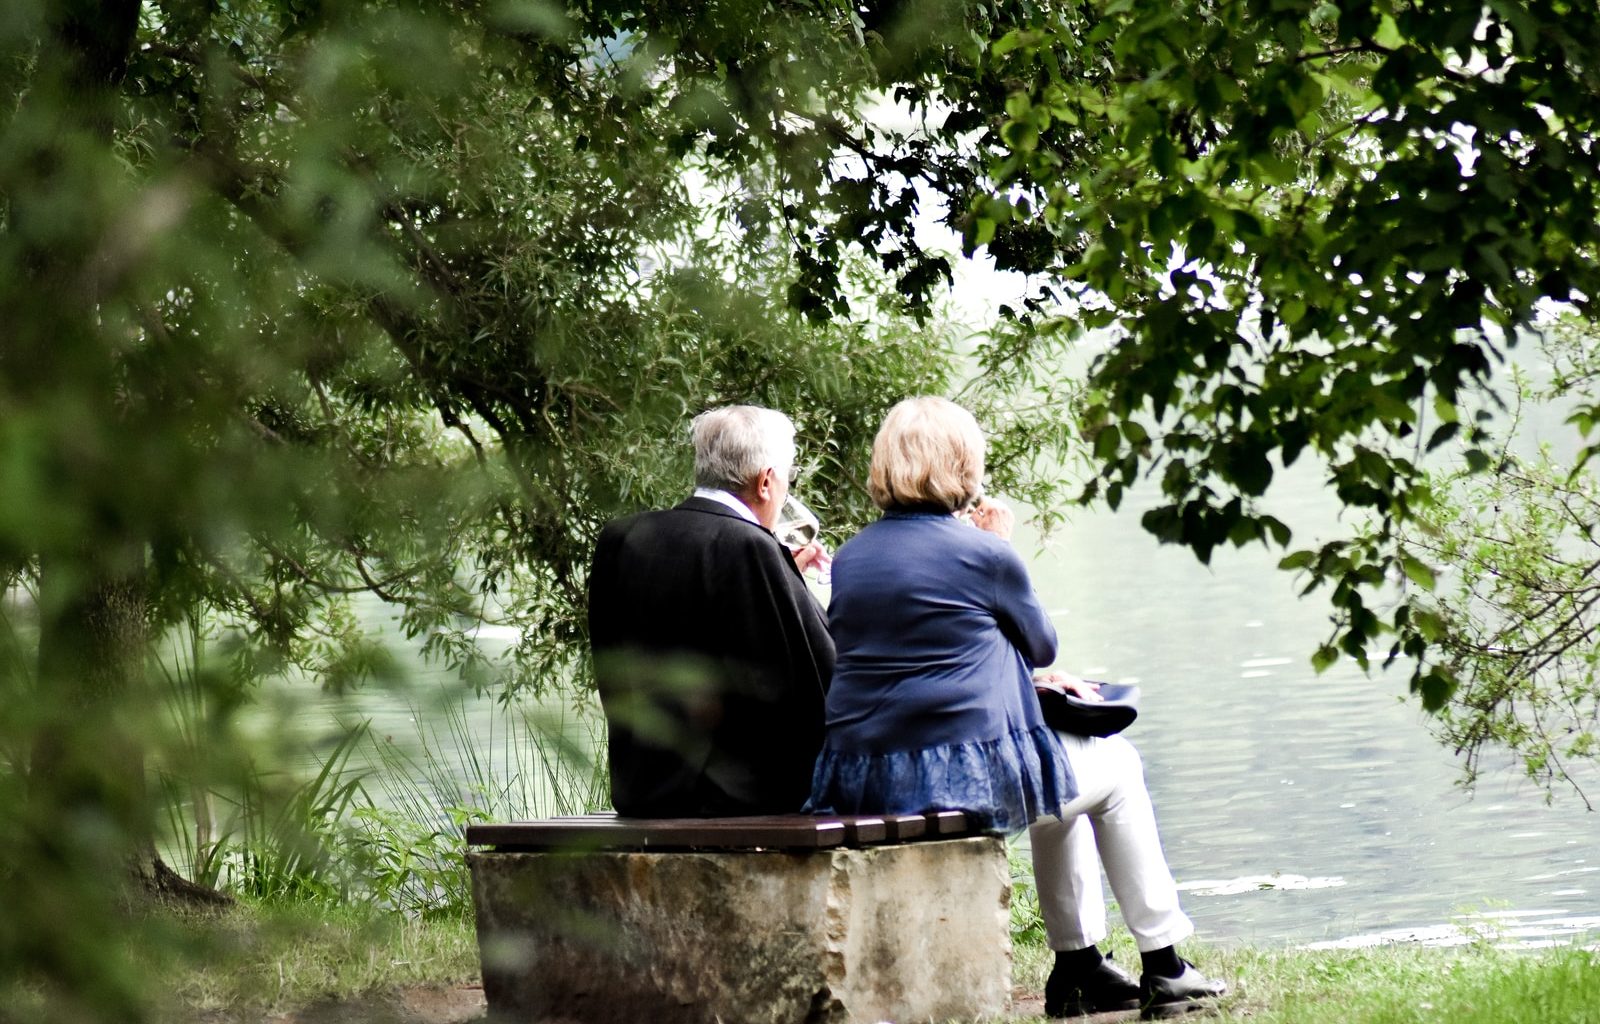 two people sitting on pavement facing on body of water